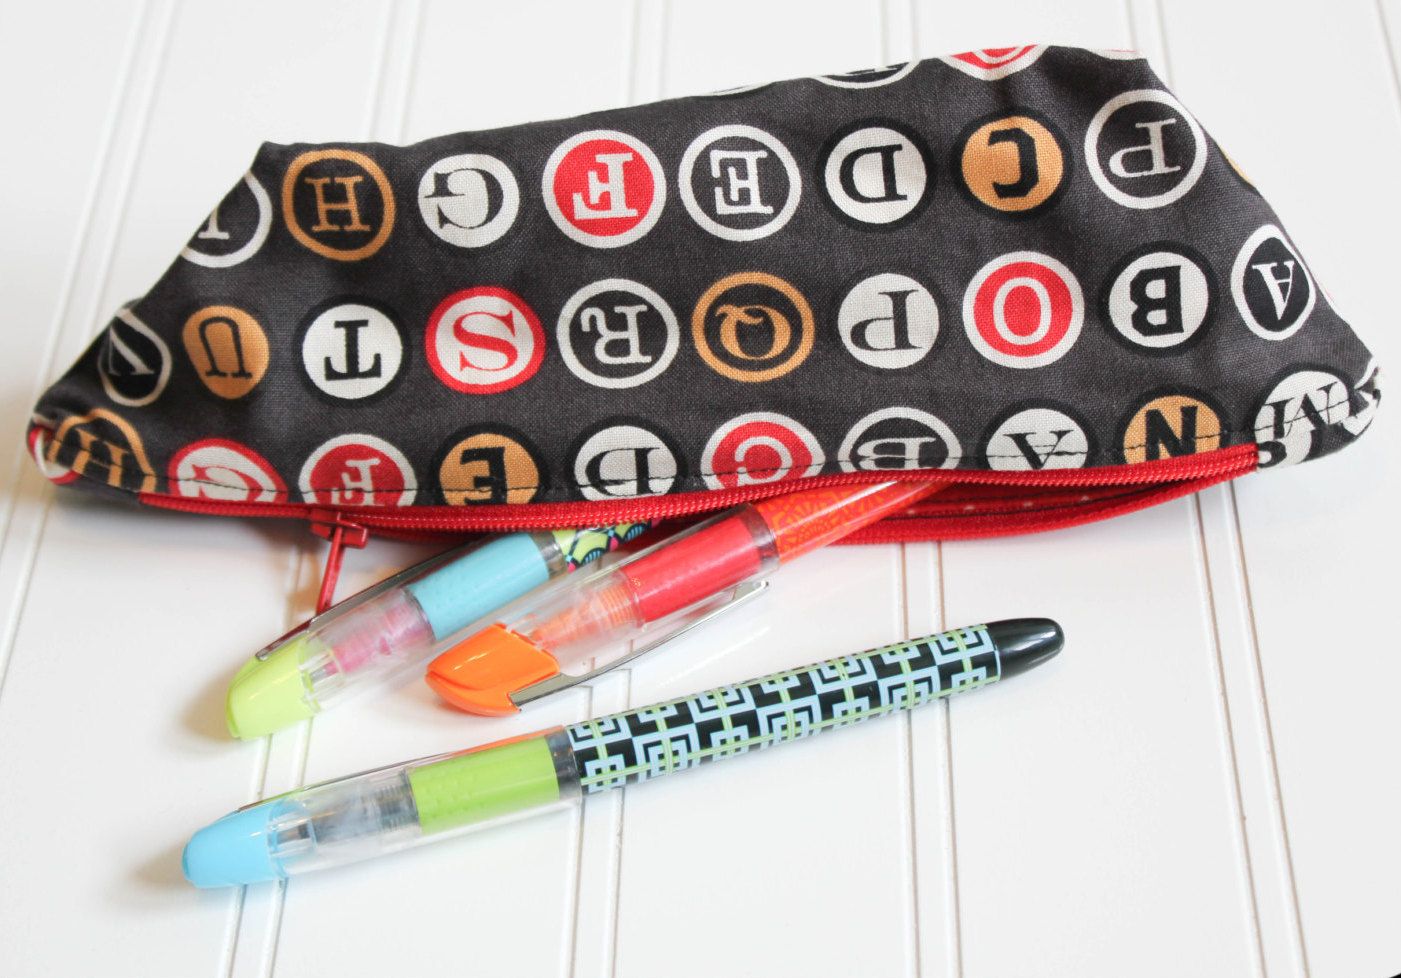 Pencil cases for writers, readers and book lovers: Vintage typewriter key pencil case on Etsy